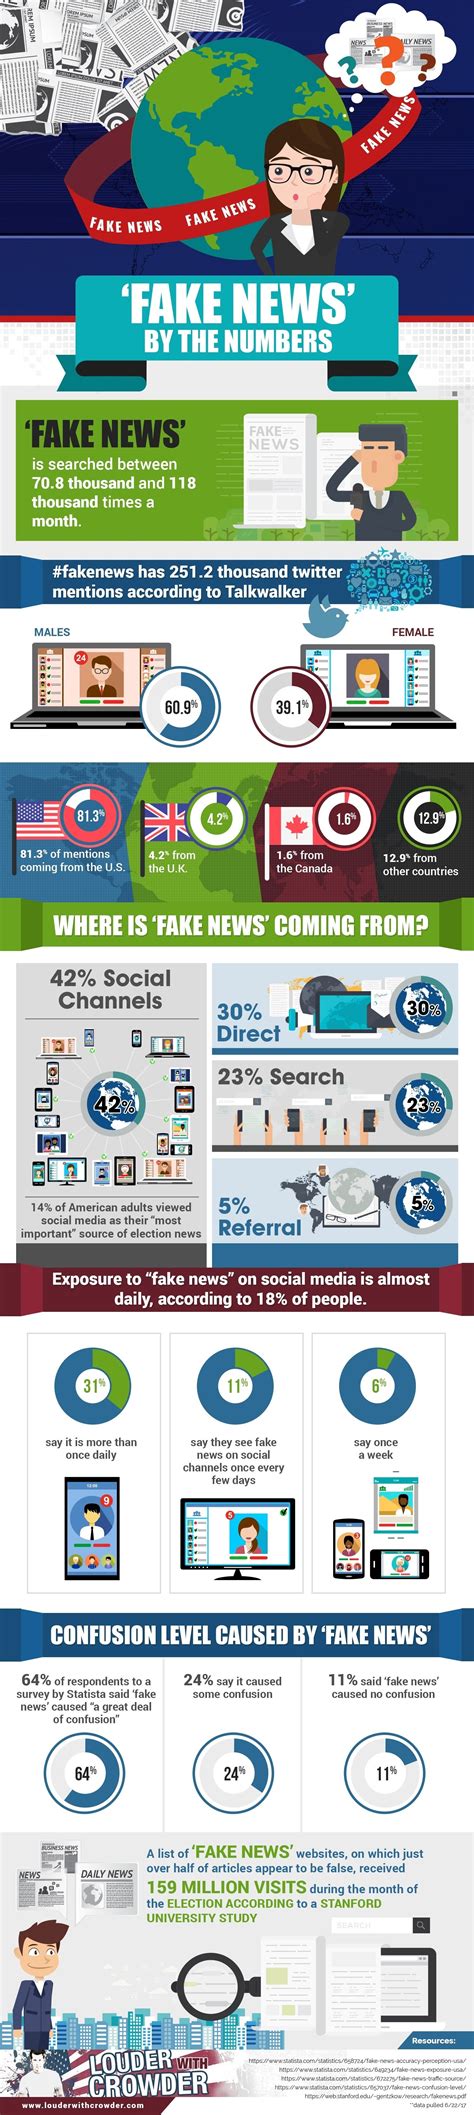 5 Tips For Dealing With Fake News